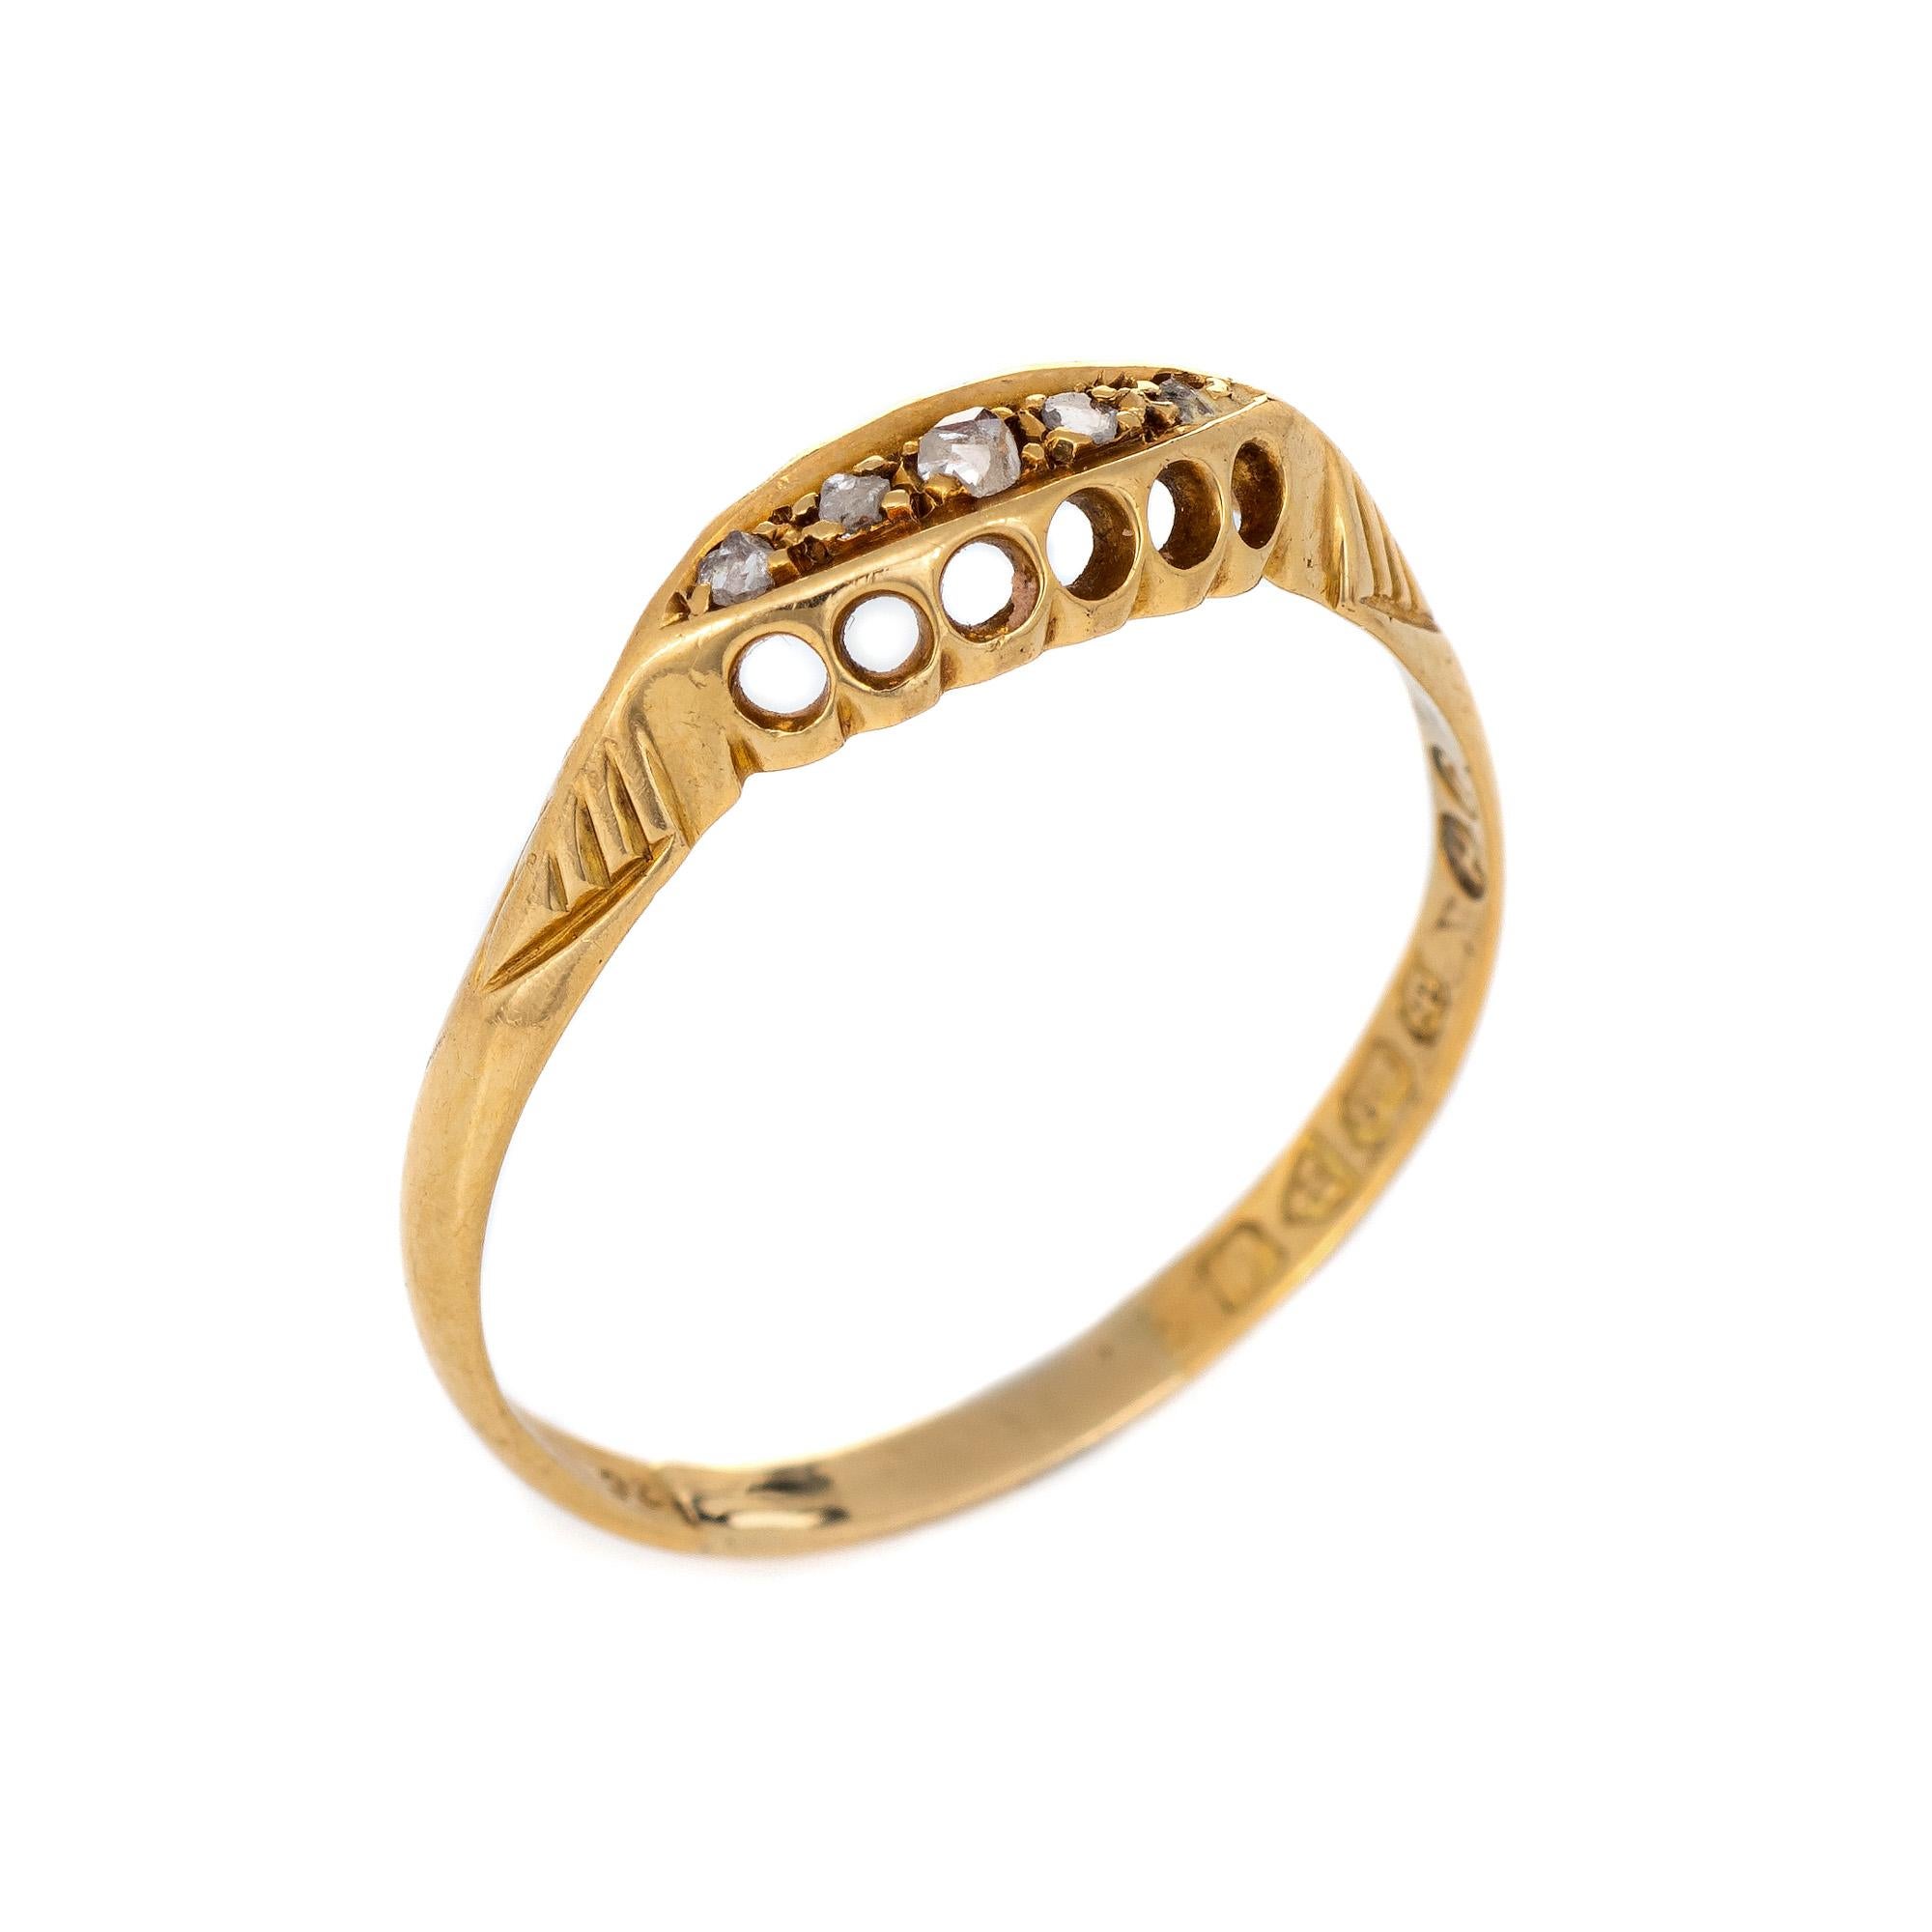 Antique Edwardian band (circa 1909), crafted in 18 karat yellow gold. 

Five old rose cut diamonds total an estimated 0.05 carats (estimated at K color and I1 clarity).   

The old rose cut diamonds are set into a five stone setting with decorative